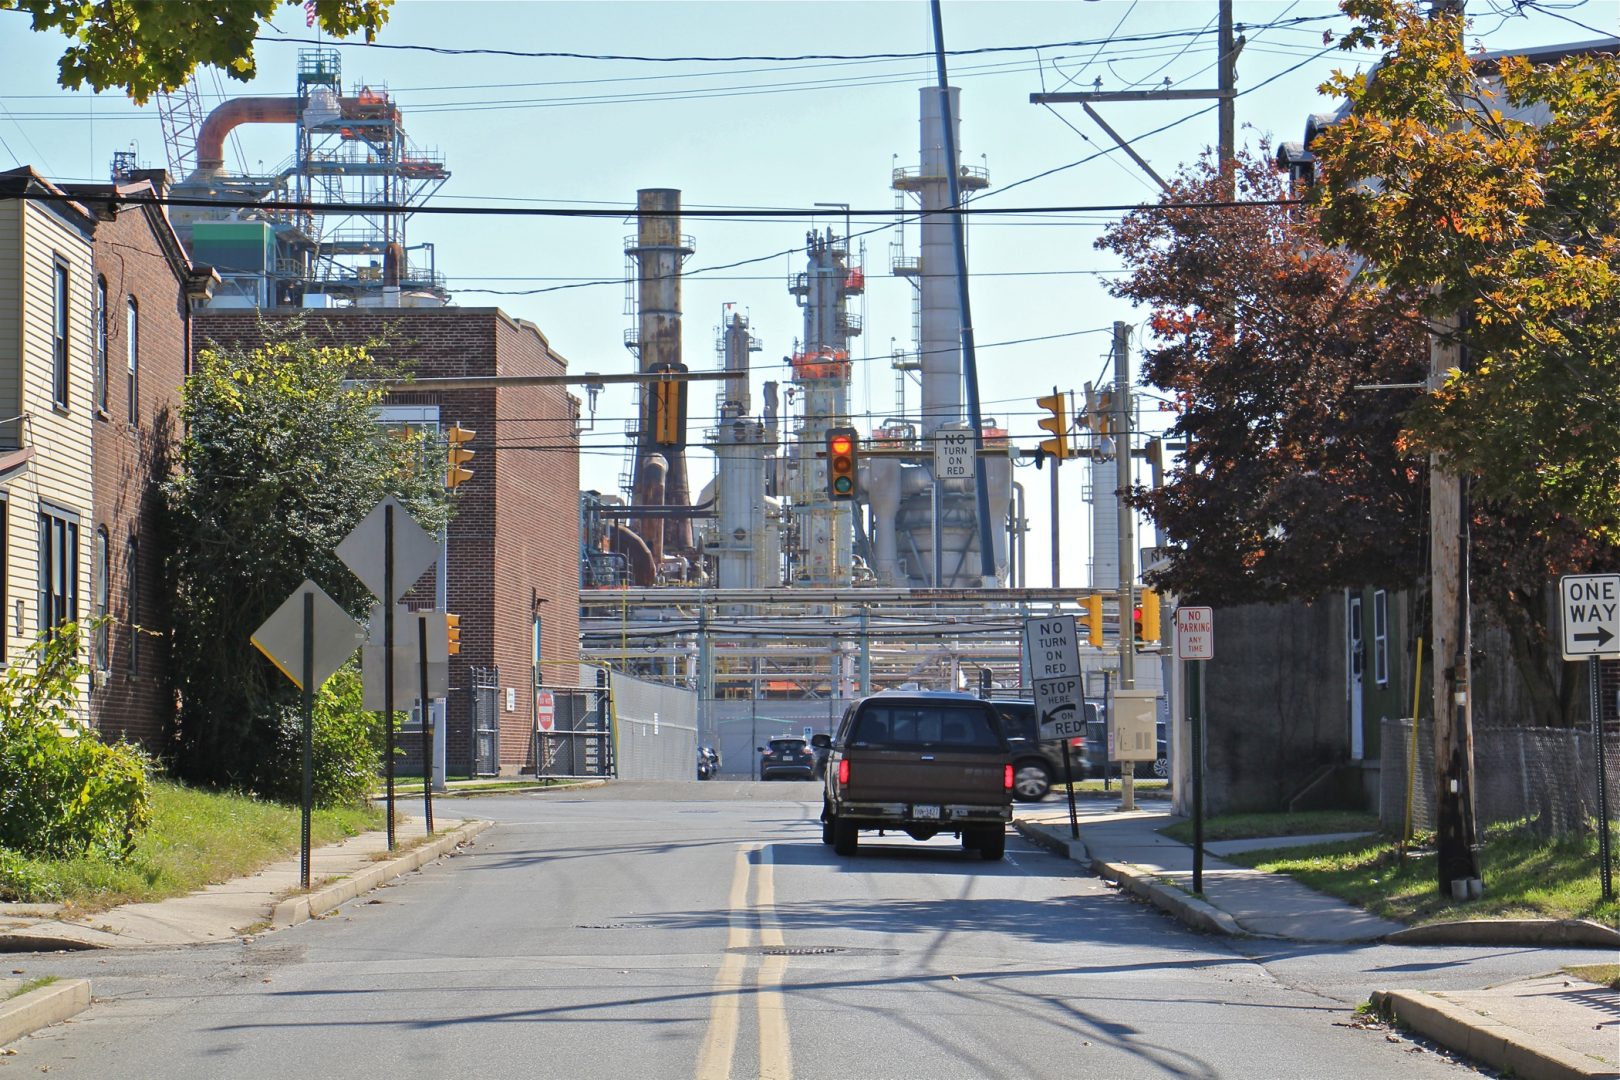 Main Street in Marcus Hook dead ends at the Monroe Energy refinery.